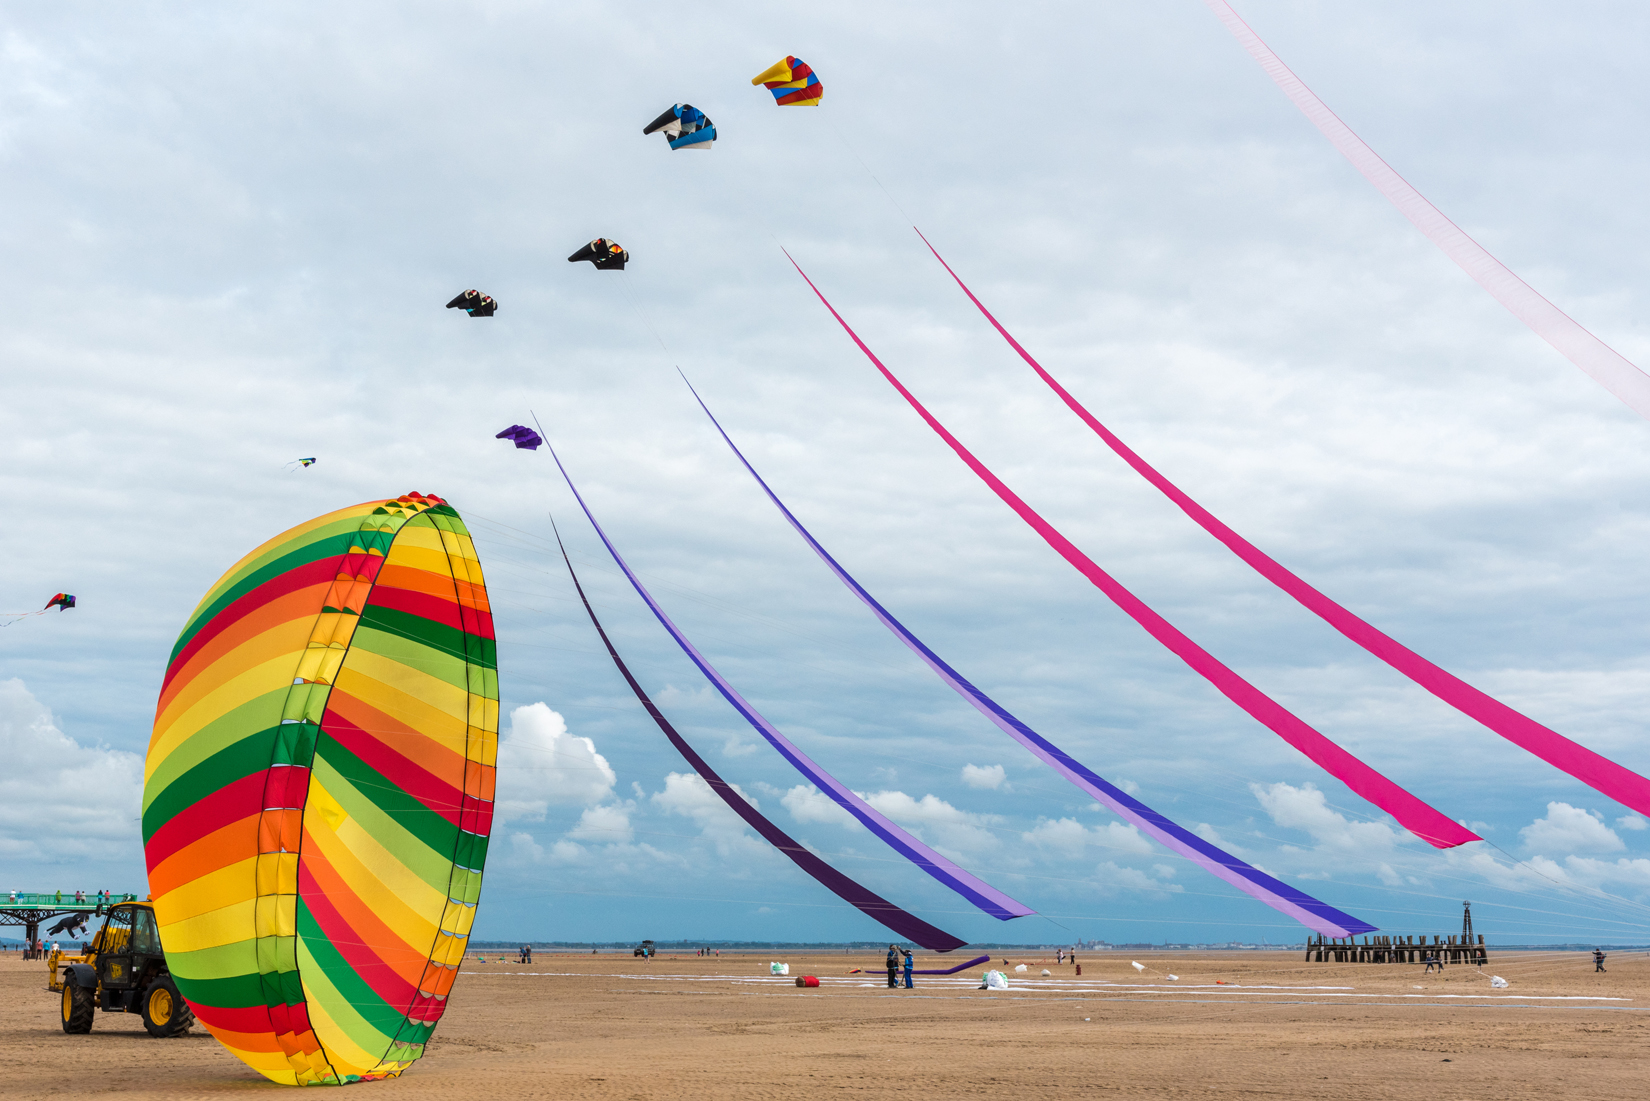 The kite-drawn sails sway in concert with the circular ring kite.